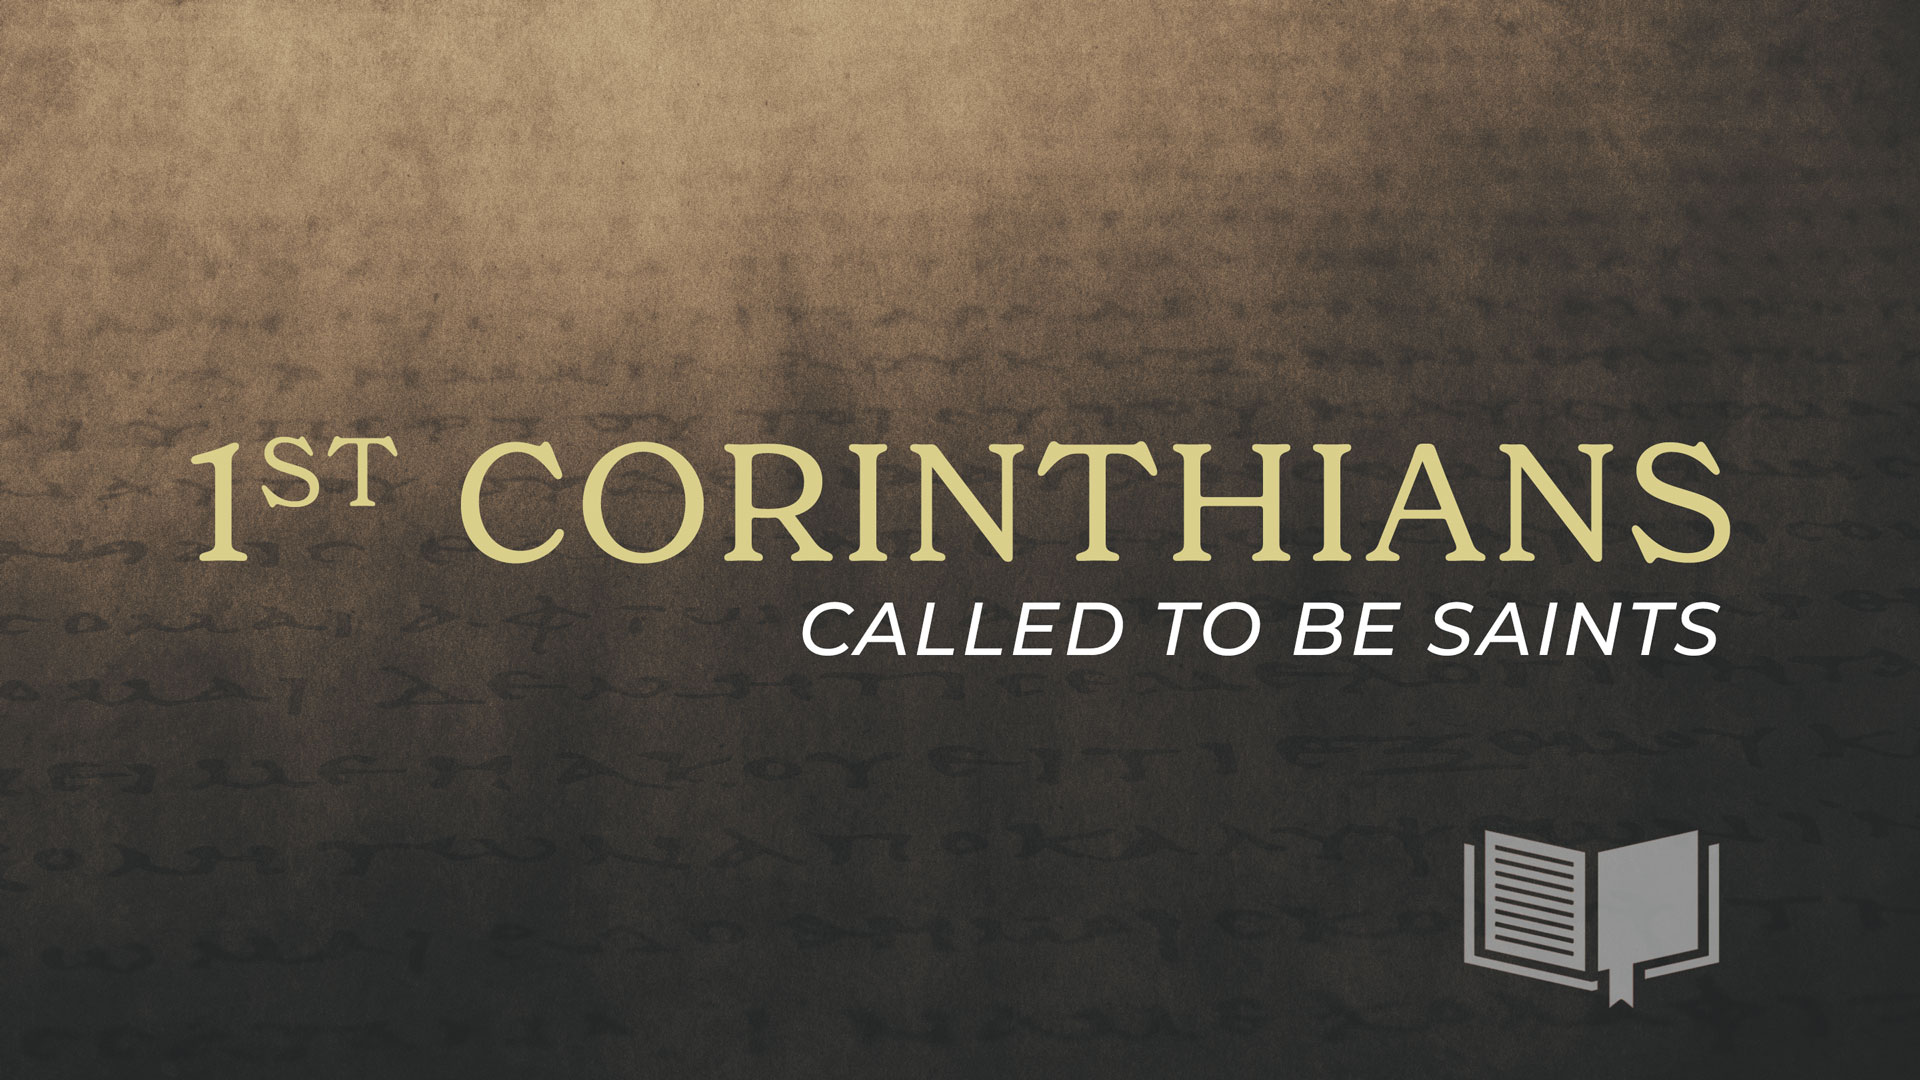 Freedom, Sexuality, and the Glory of God, Part 2 (1 Corinthians 6:12-20)